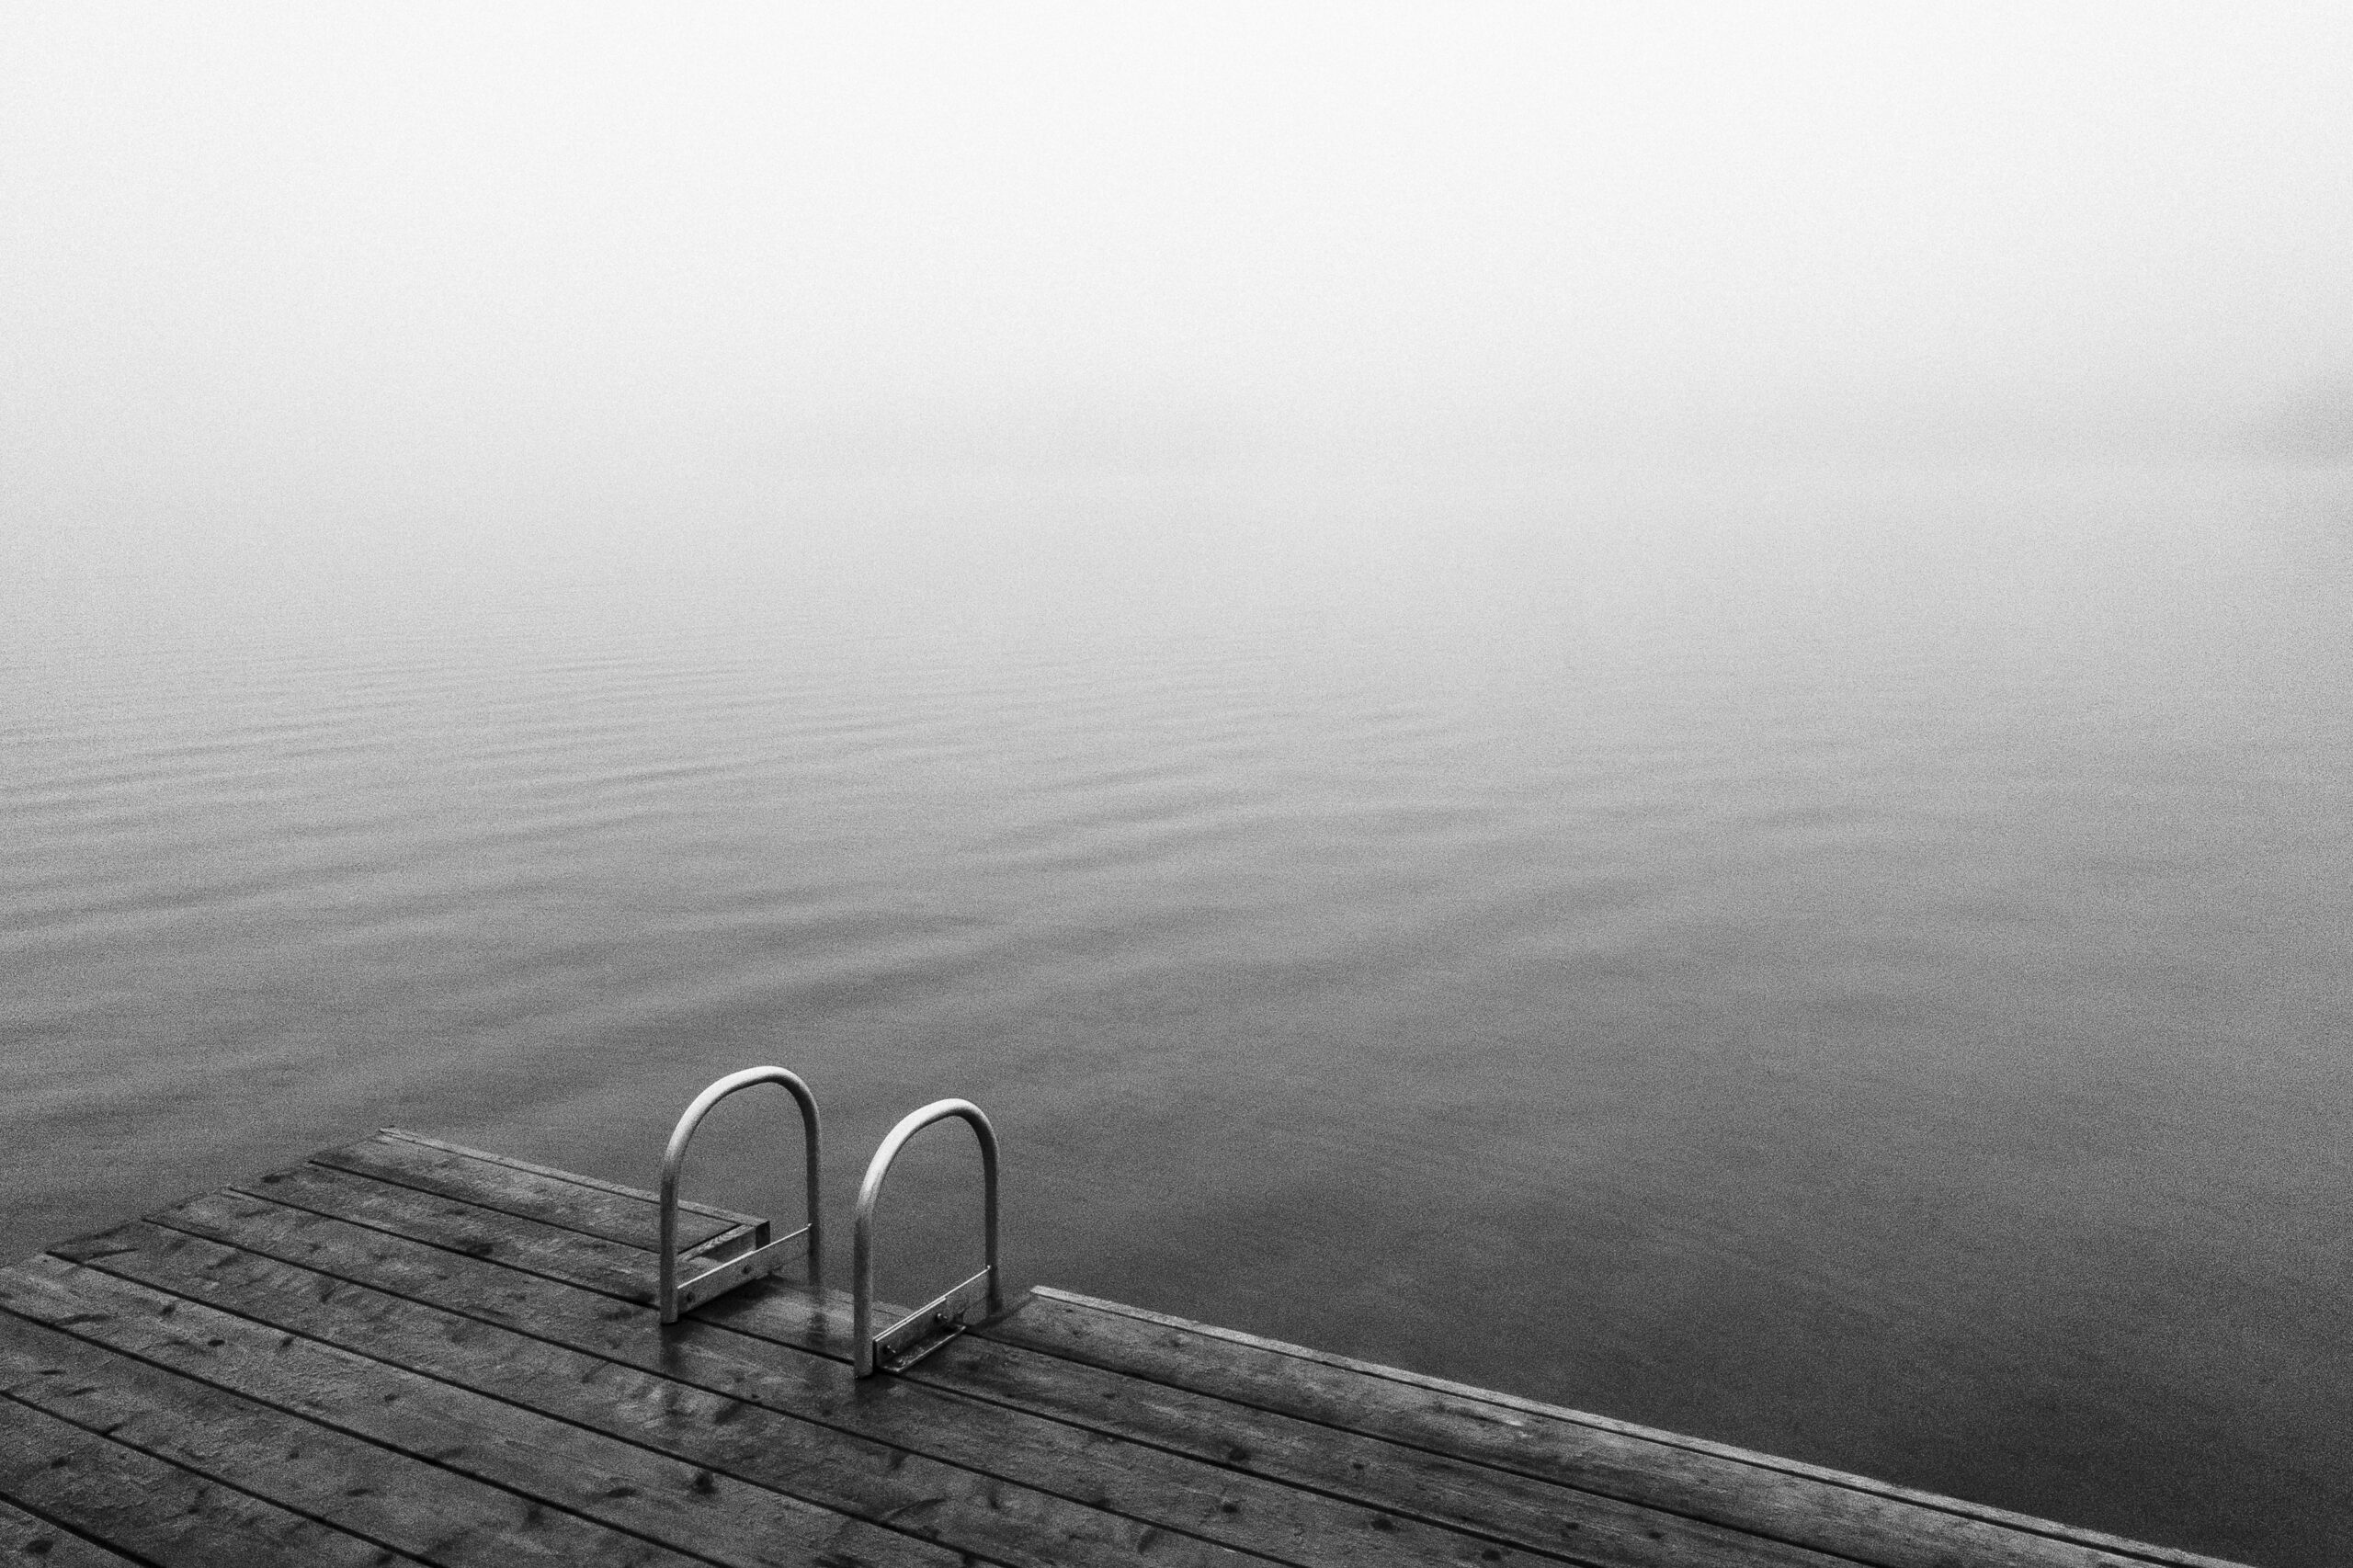 Simply-splendid: Our favorite reader-submitted minimalist photos